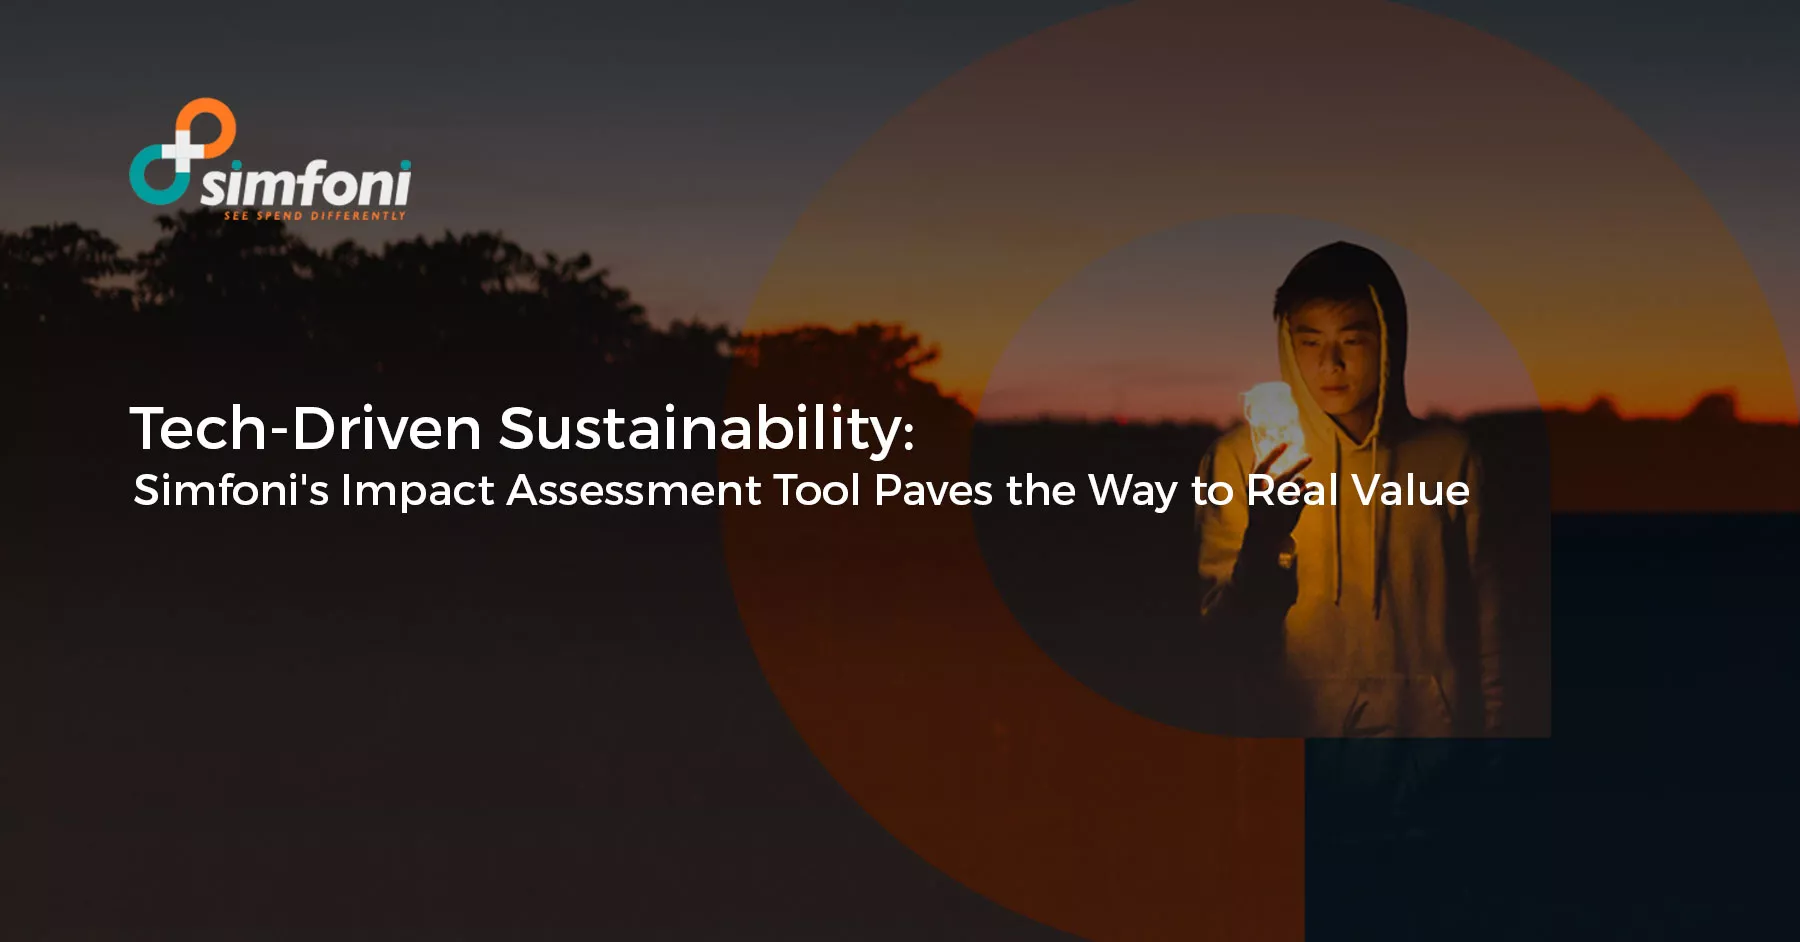 Tech-Driven Sustainability: Simfoni’s Impact Assessment Tool Paves the Way to Real Value